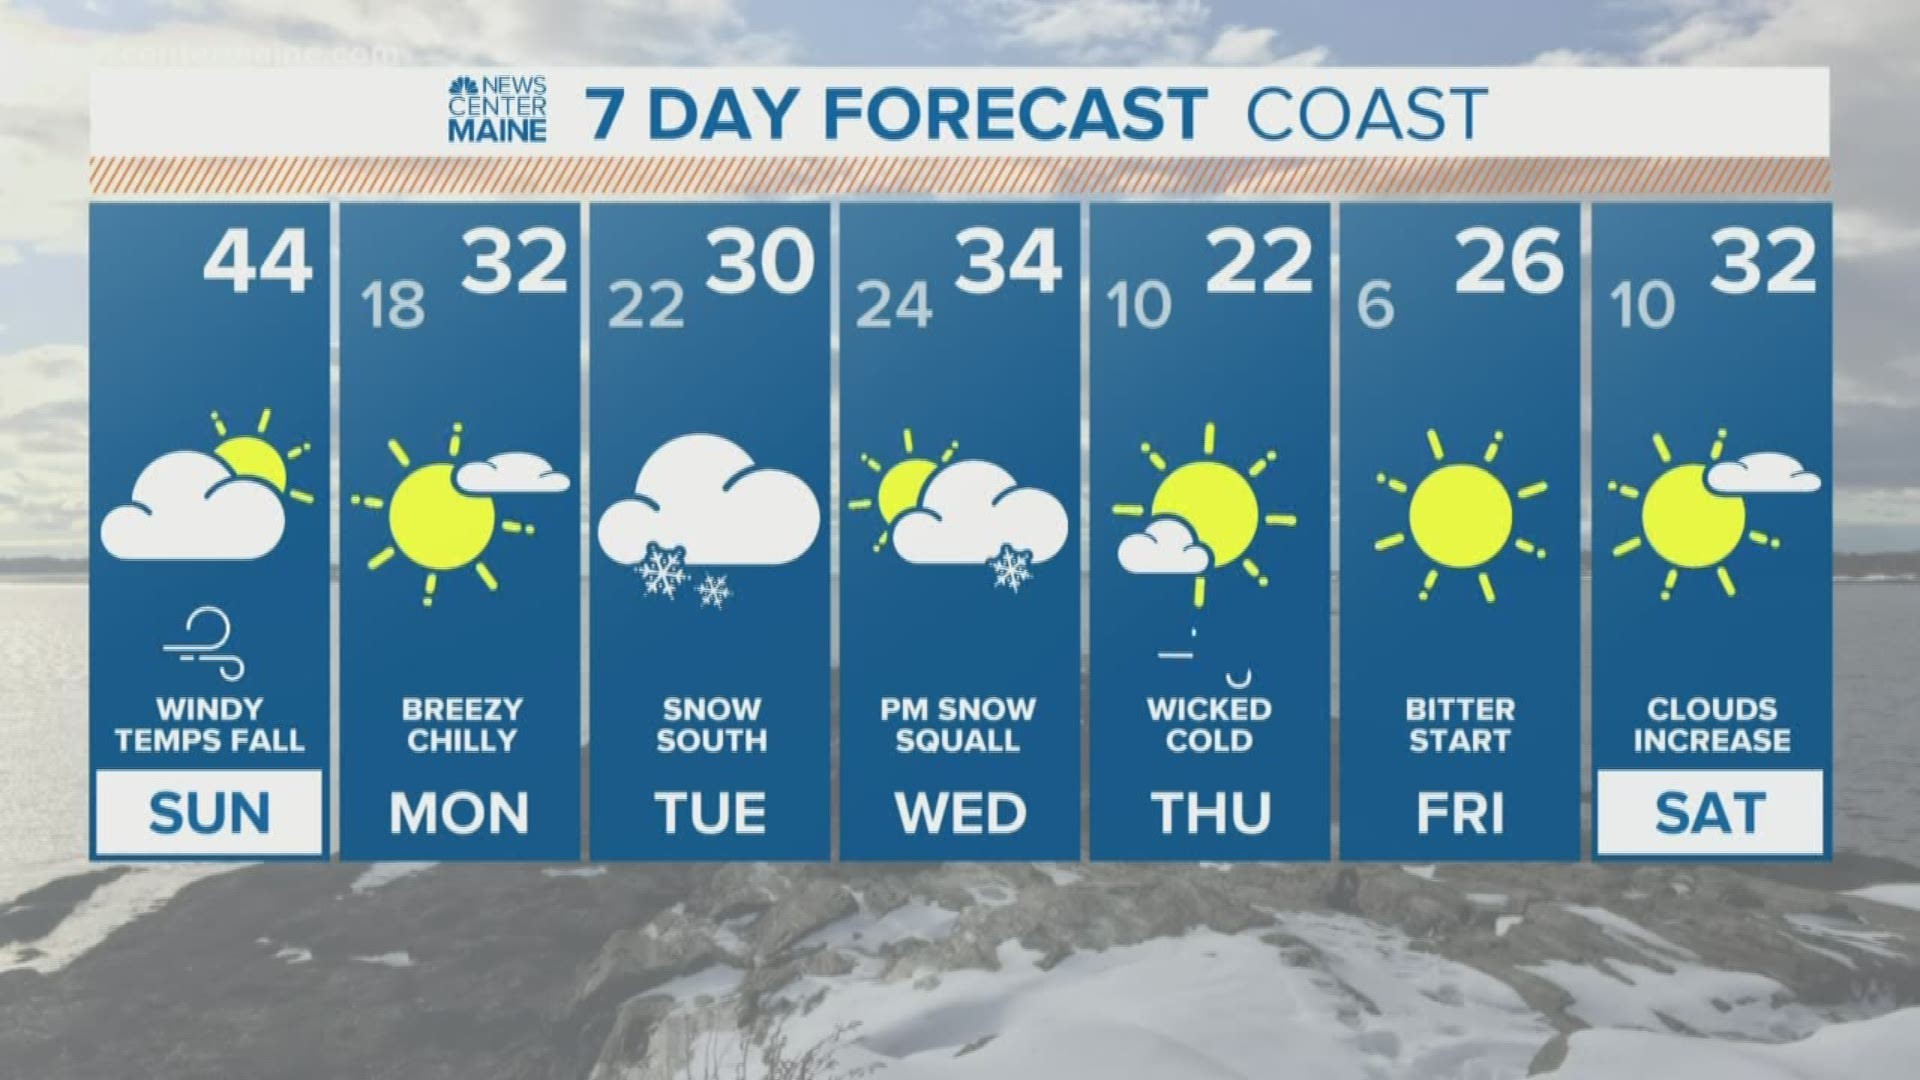 NEWS CENTER Maine Weather Video Forecast. Updated on 12/15/19 at 8 am.